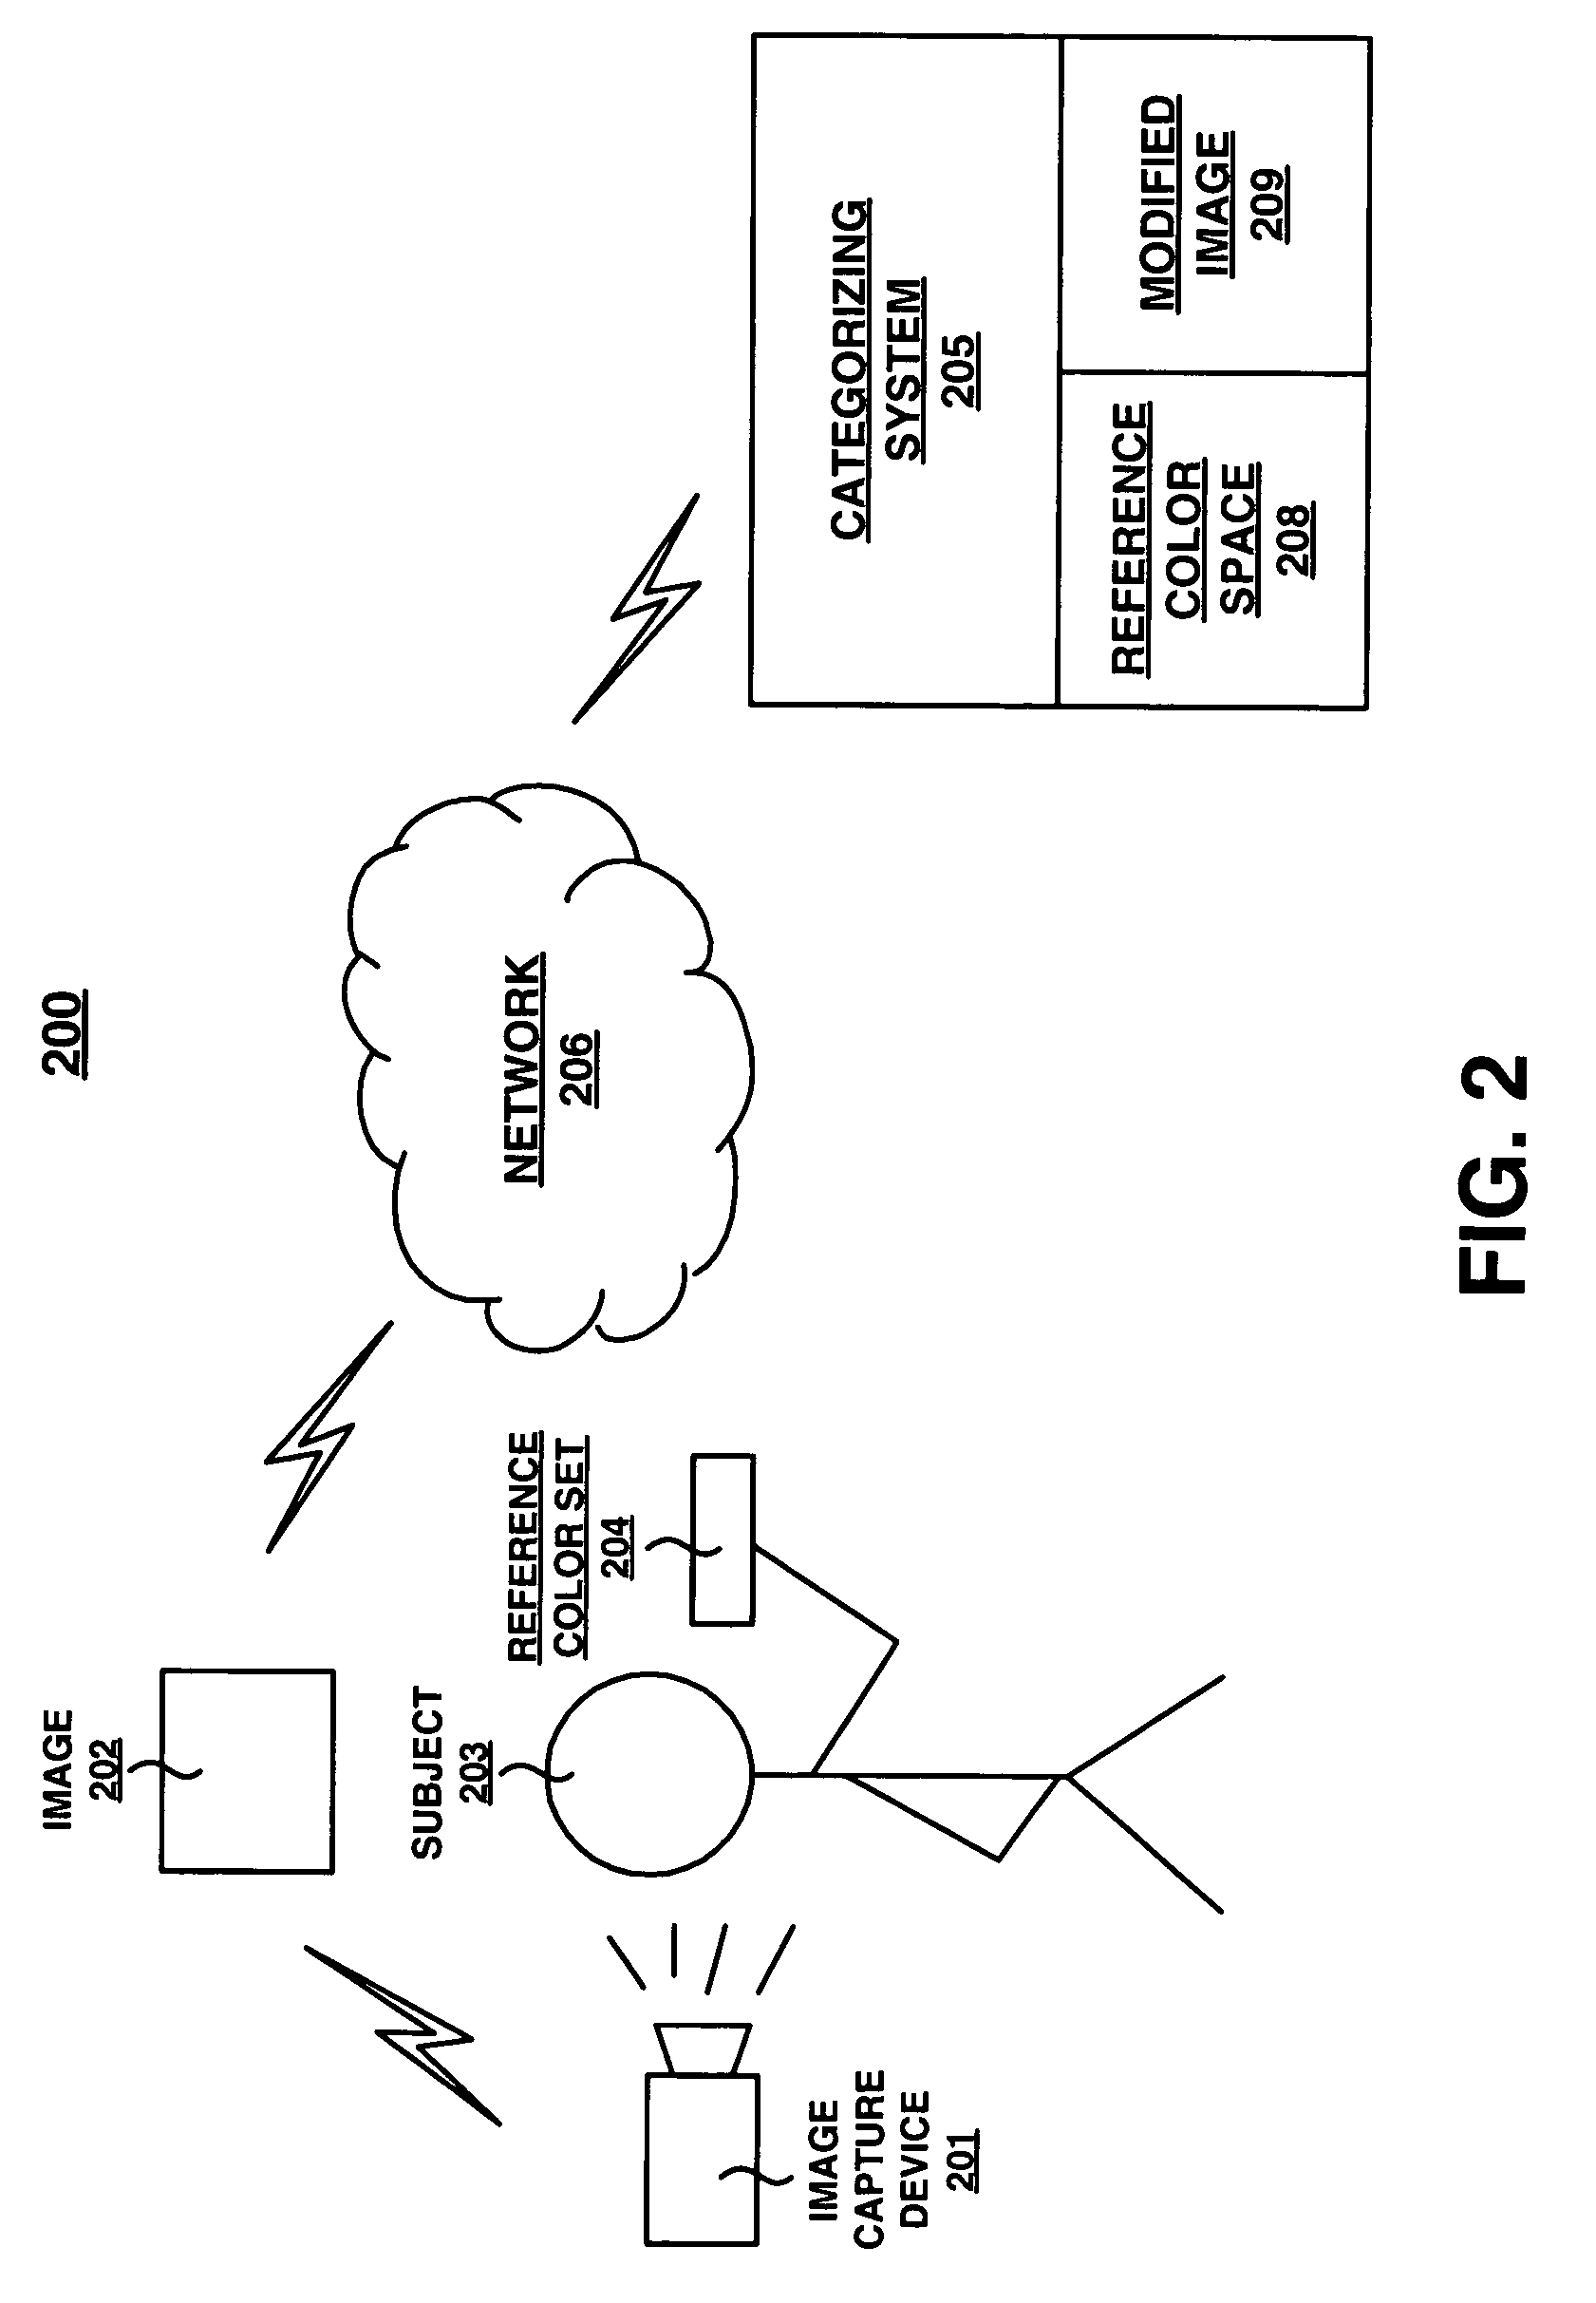 Method and system for skin color estimation from an image